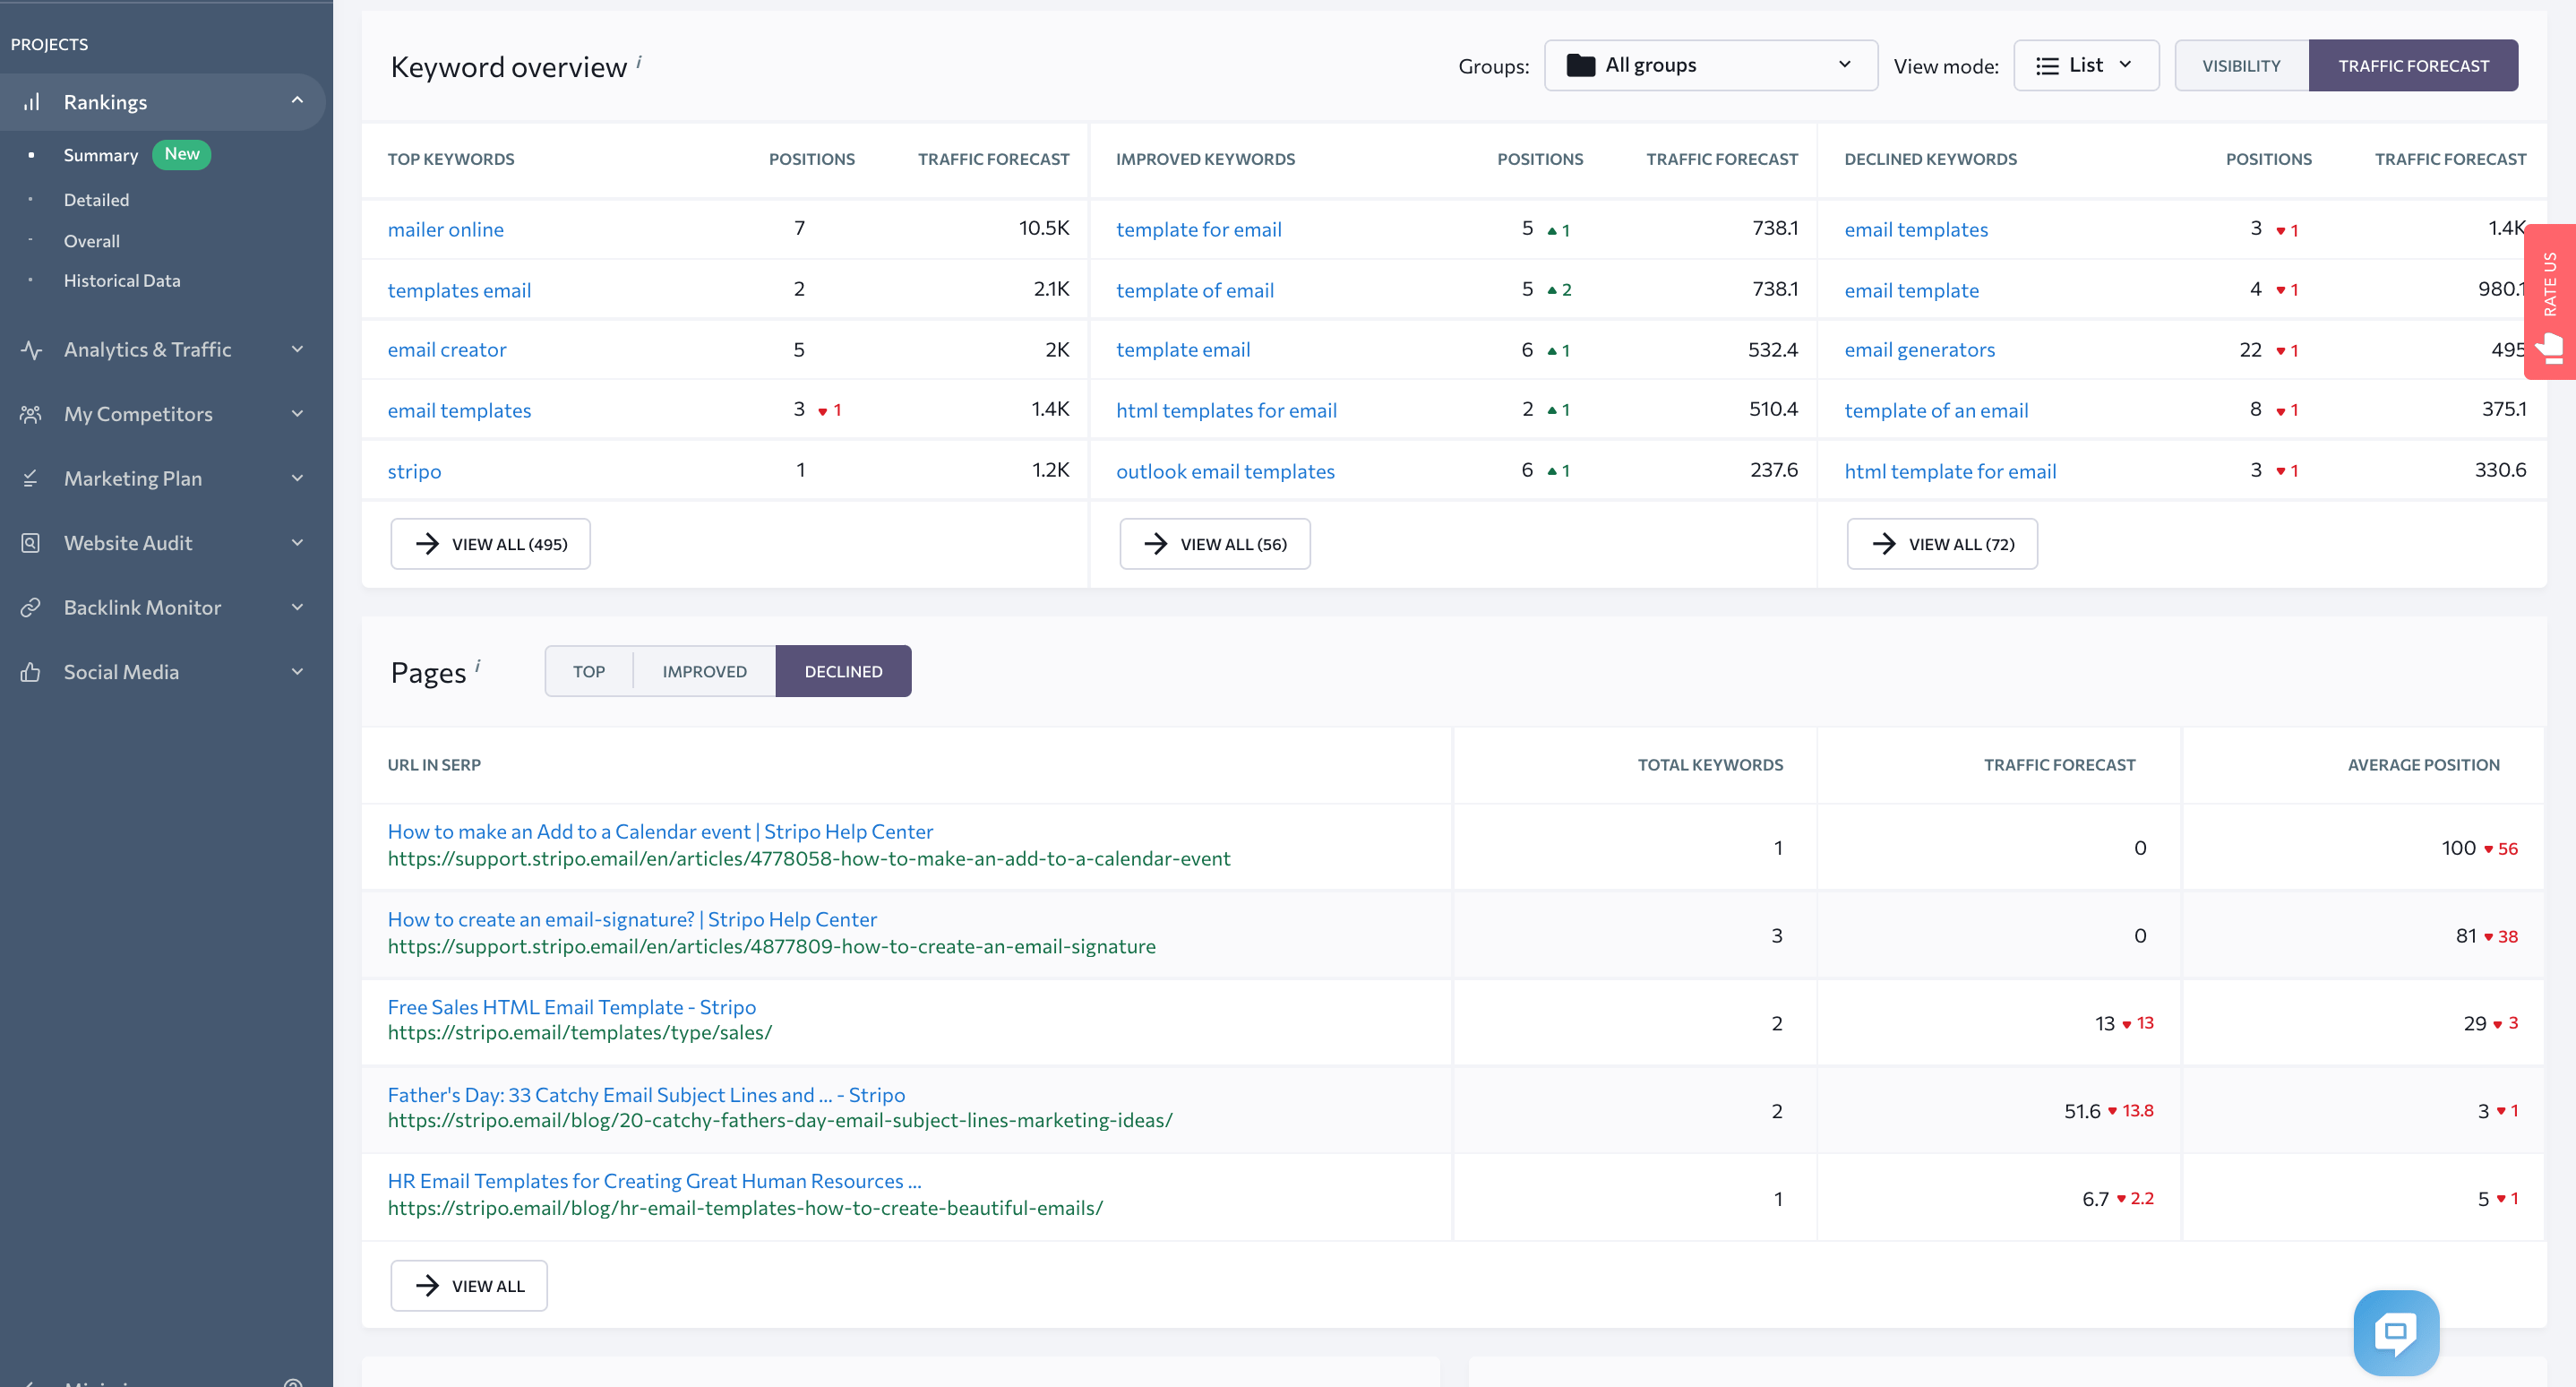 Top keywords and pages on Summary dashboard